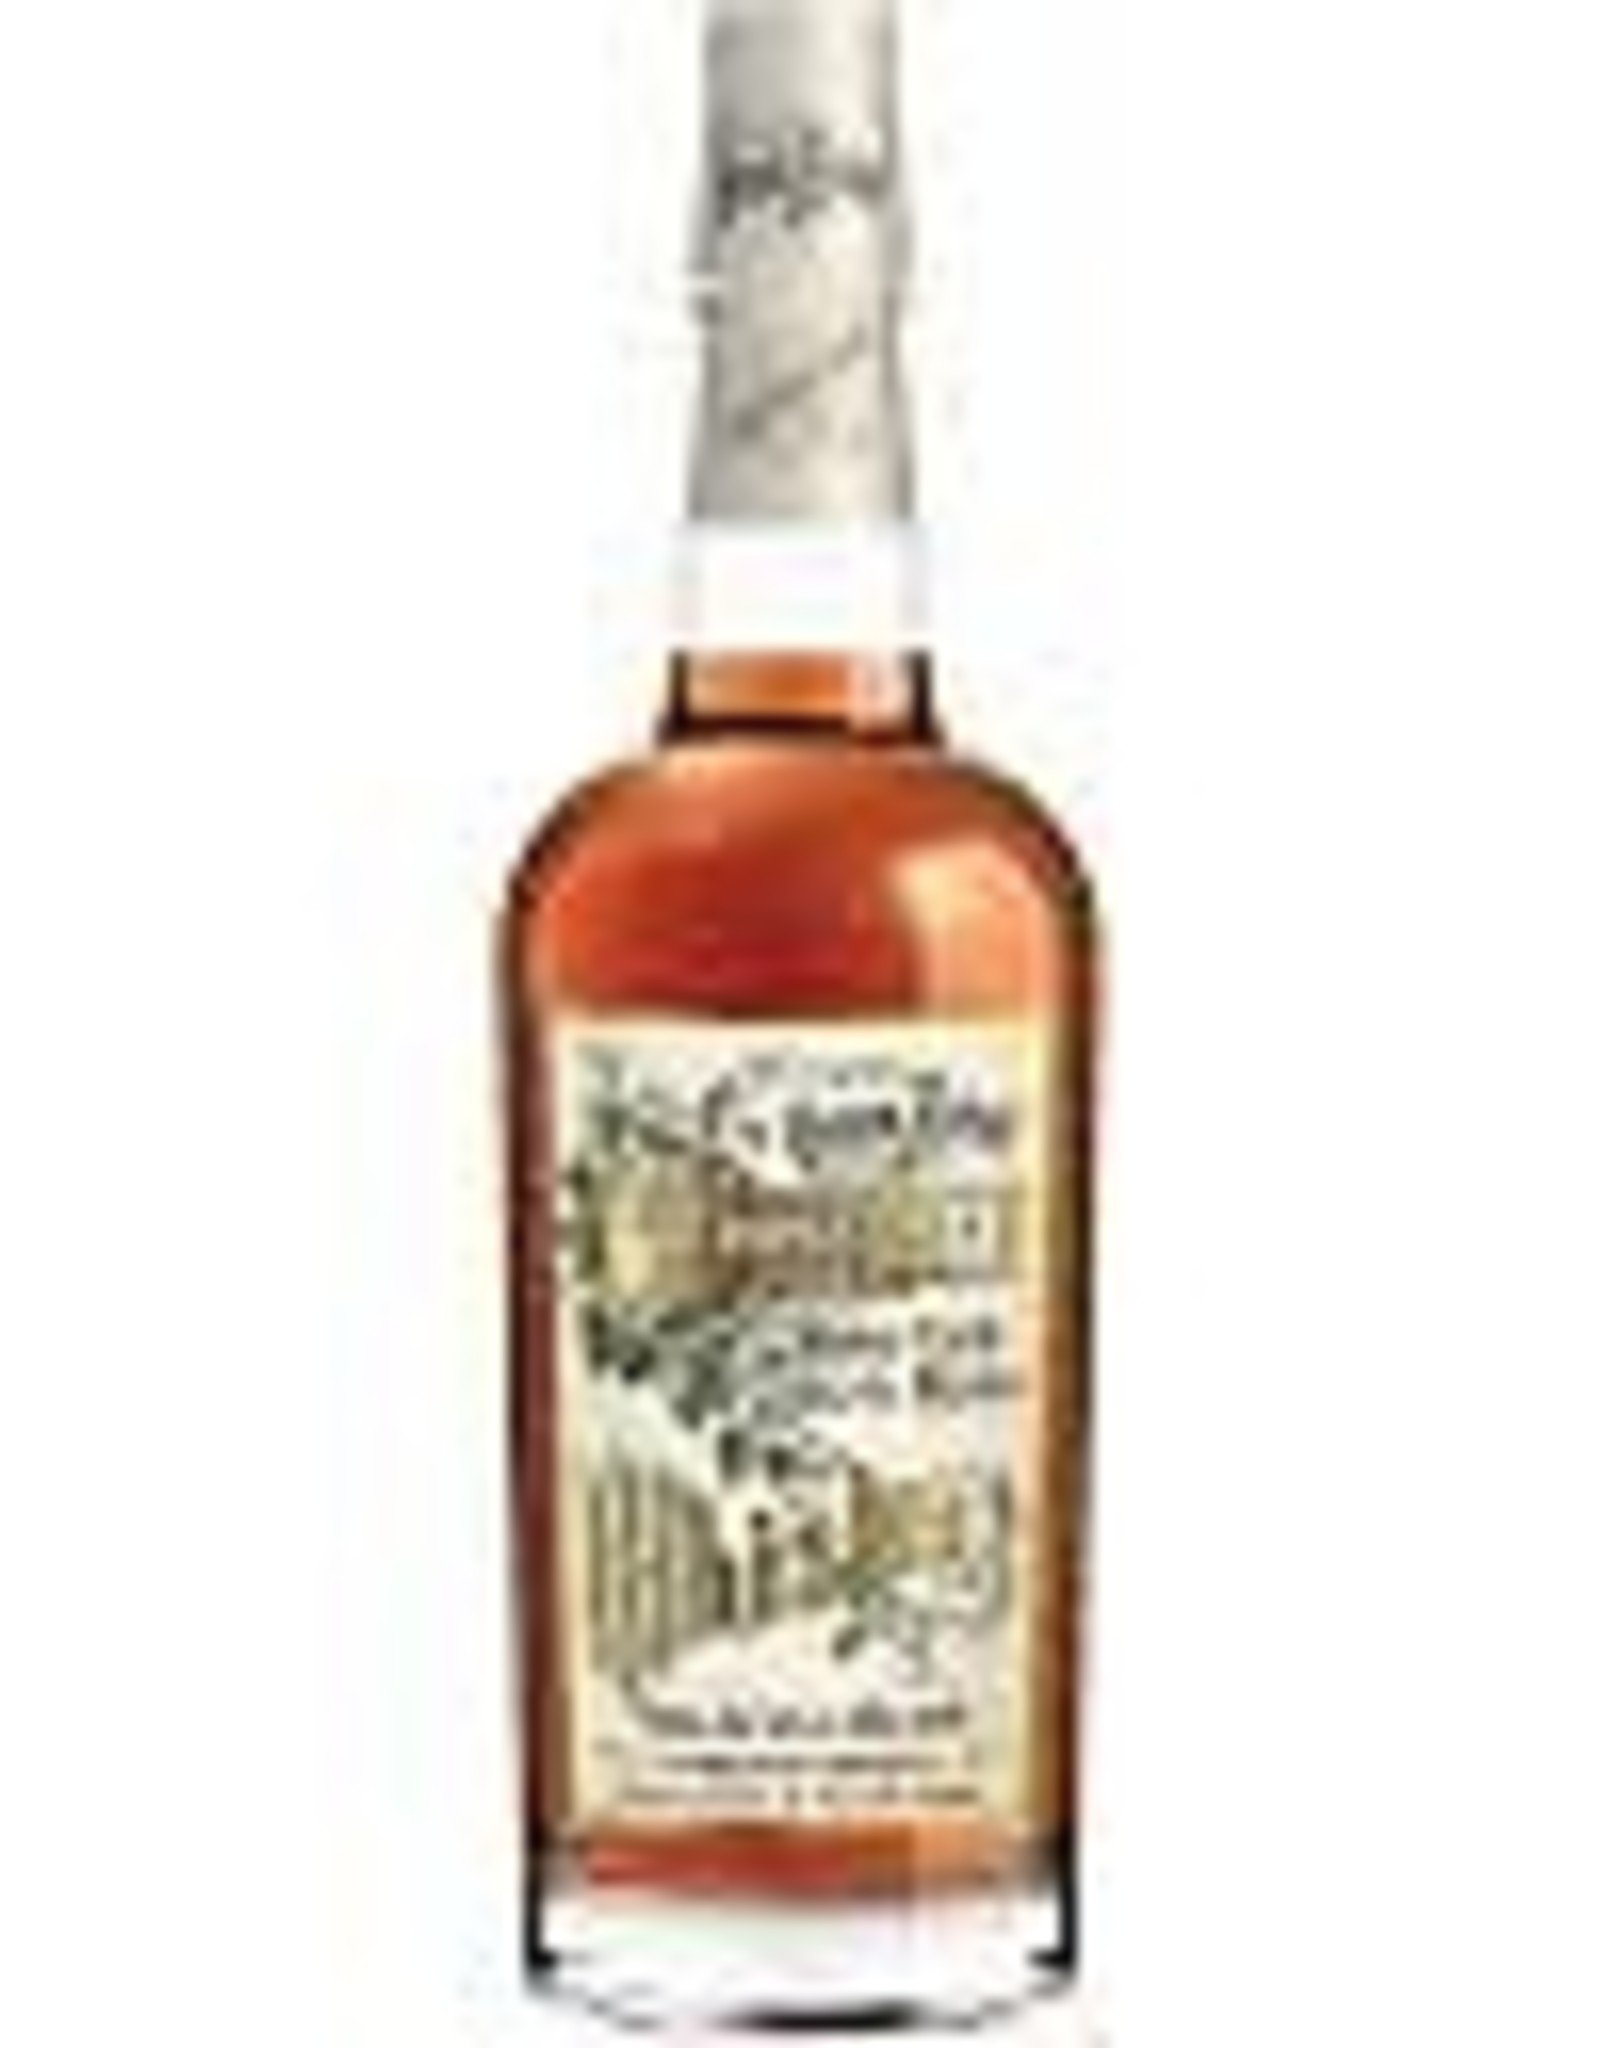 Nelson's "Green Brier" Tennesse Sour Mash Whiskey